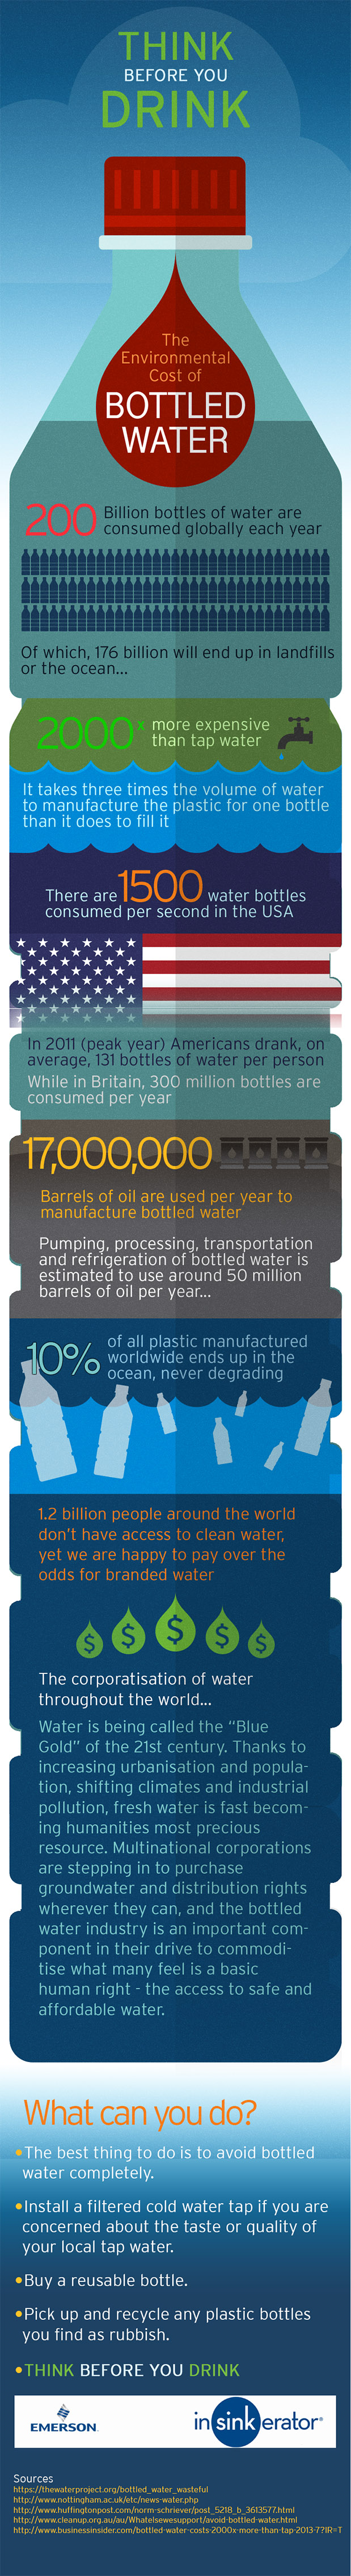 (Source: http://insinkerator.co.uk/uk/page/environmental-cost-of-bottled-water)